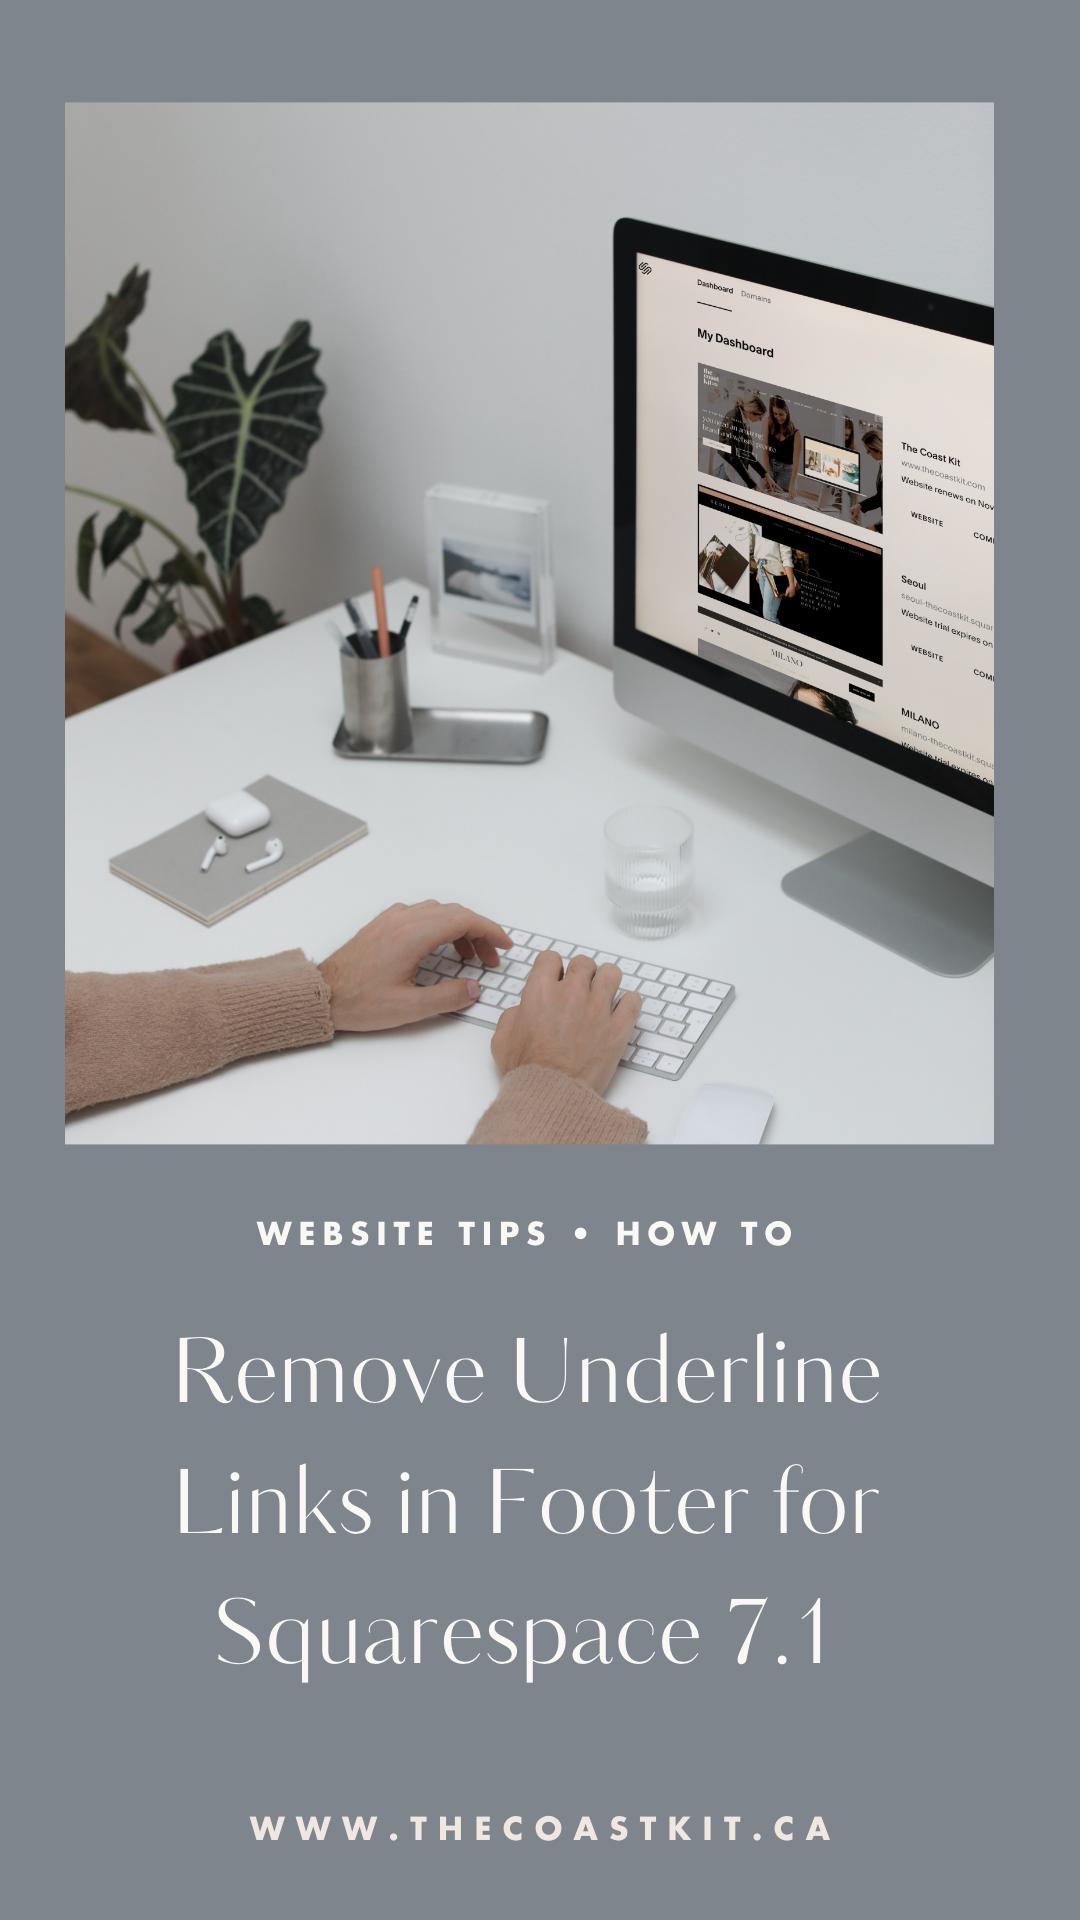 how-to-remove-underline-links-footer-squarespace-7-1-3.png